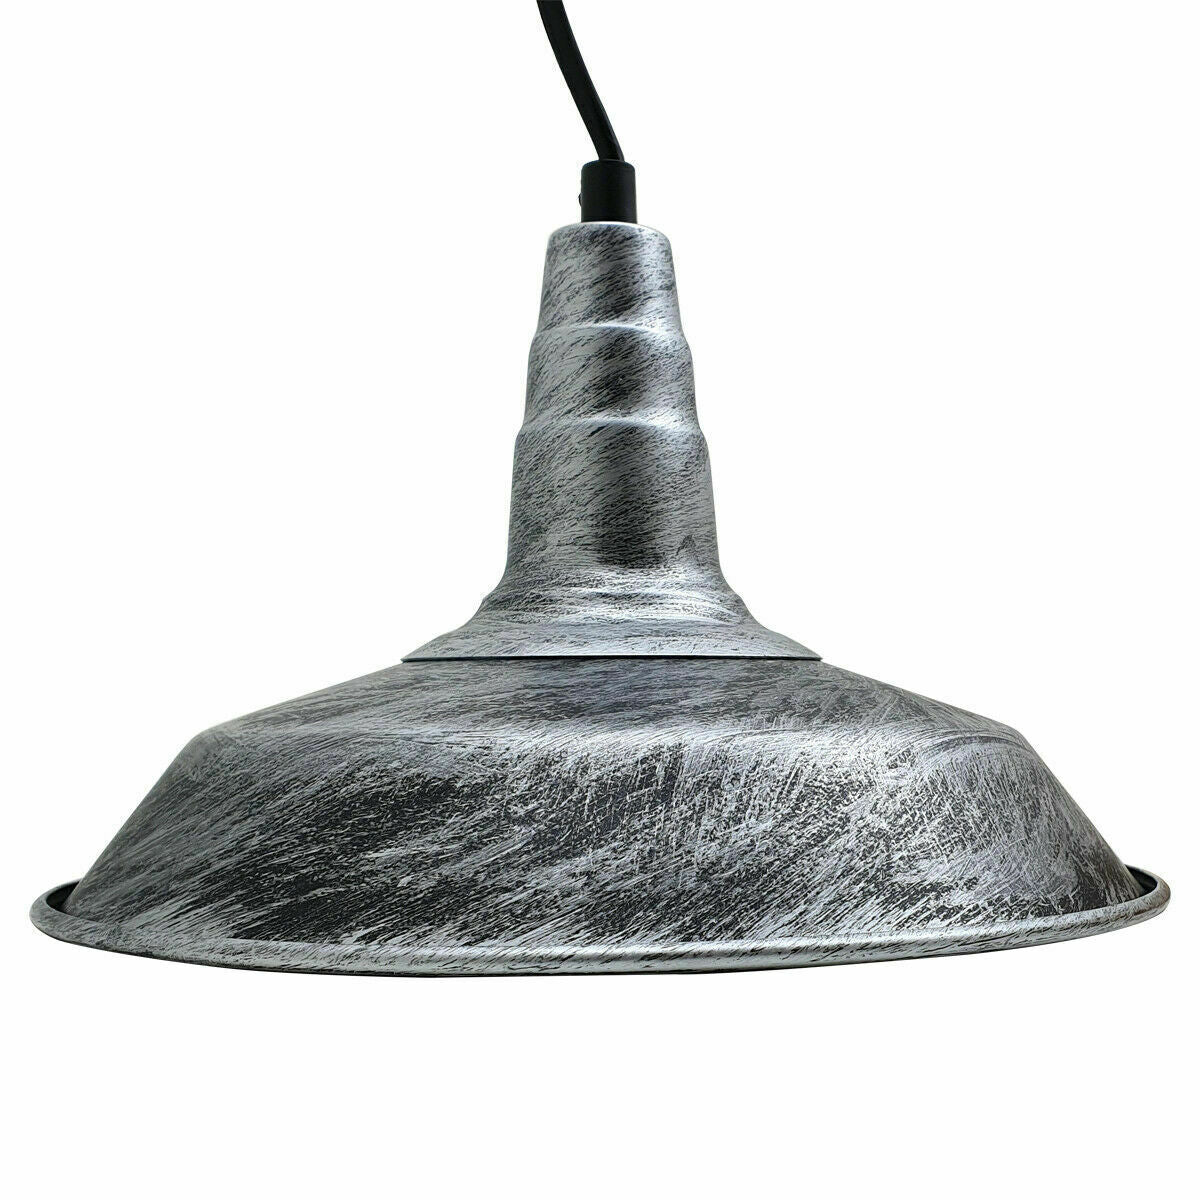 Kitchen pendant light with a silver metal bowl shade.